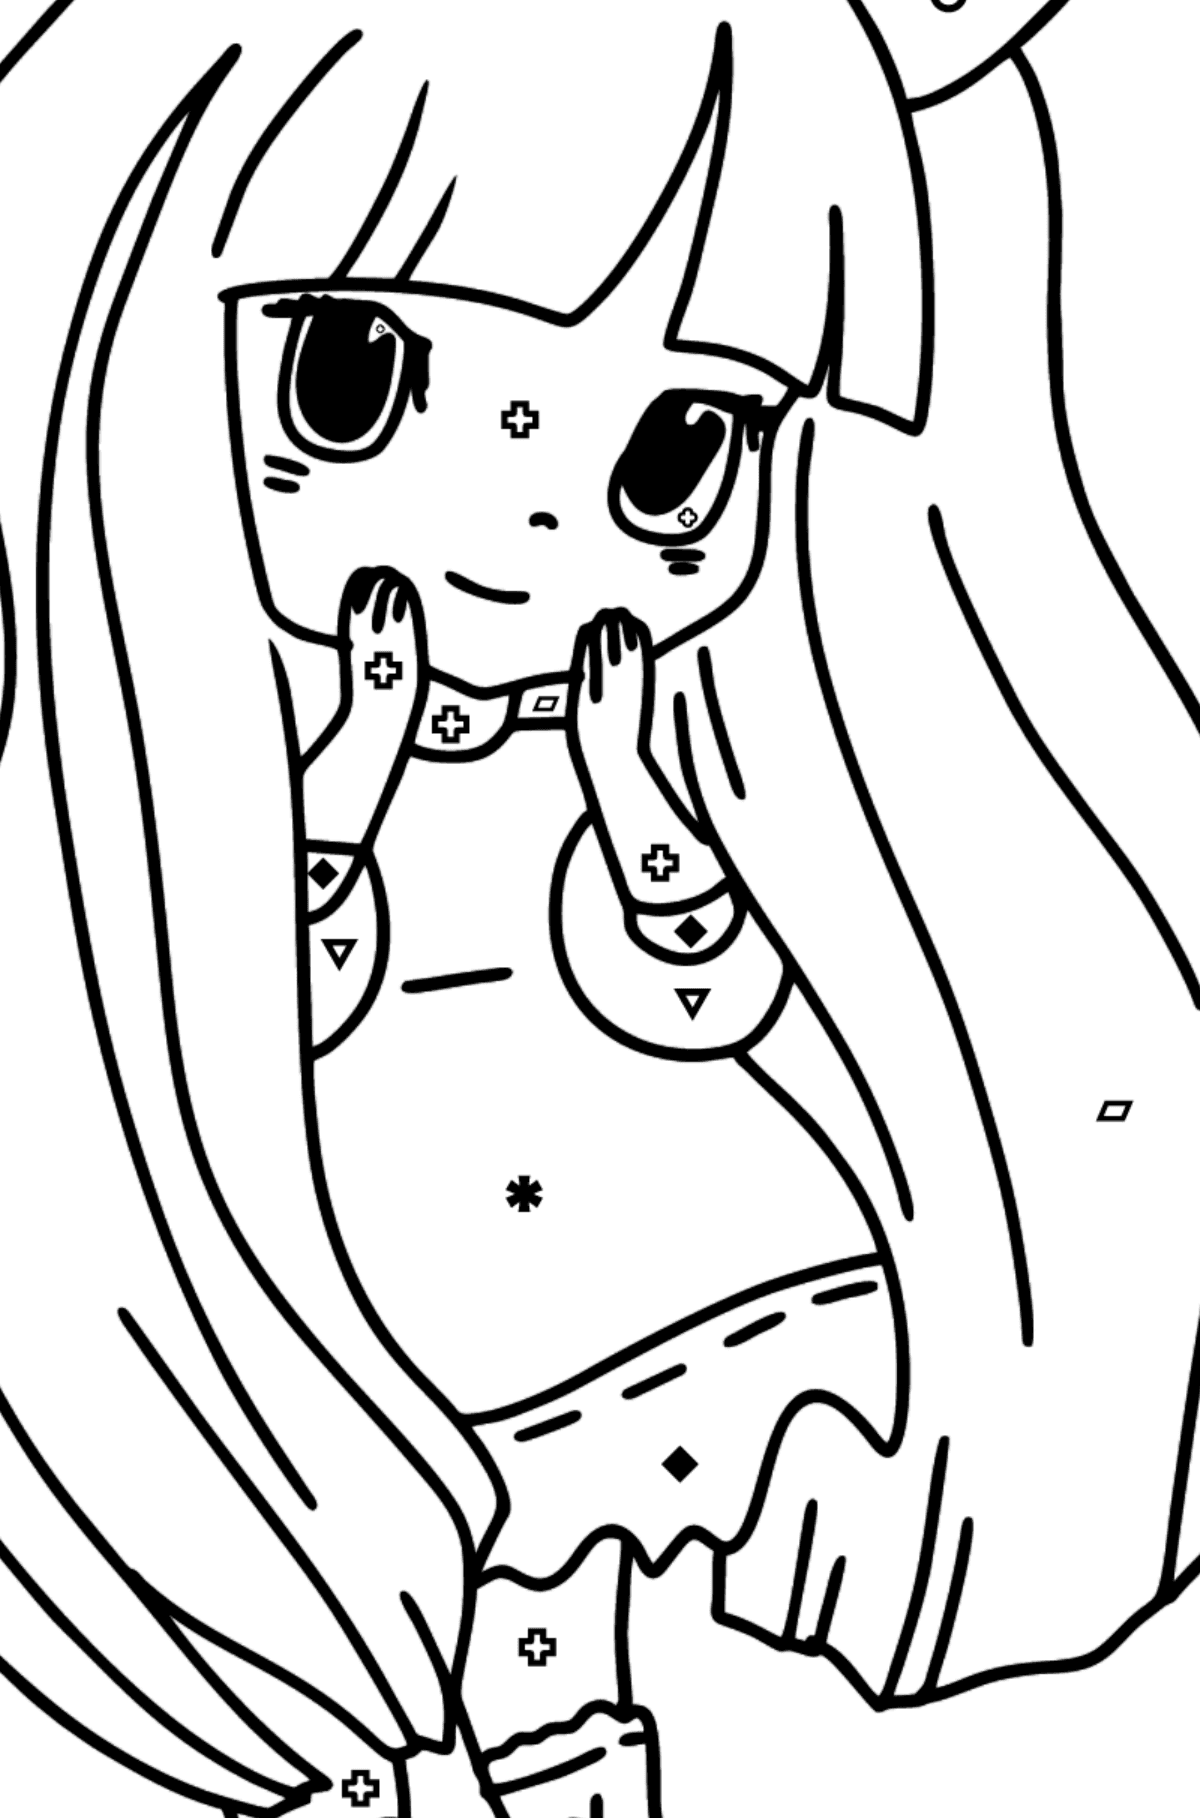 Anime Bunny Girl Coloring Pages - Coloring by Symbols and Geometric Shapes for Kids